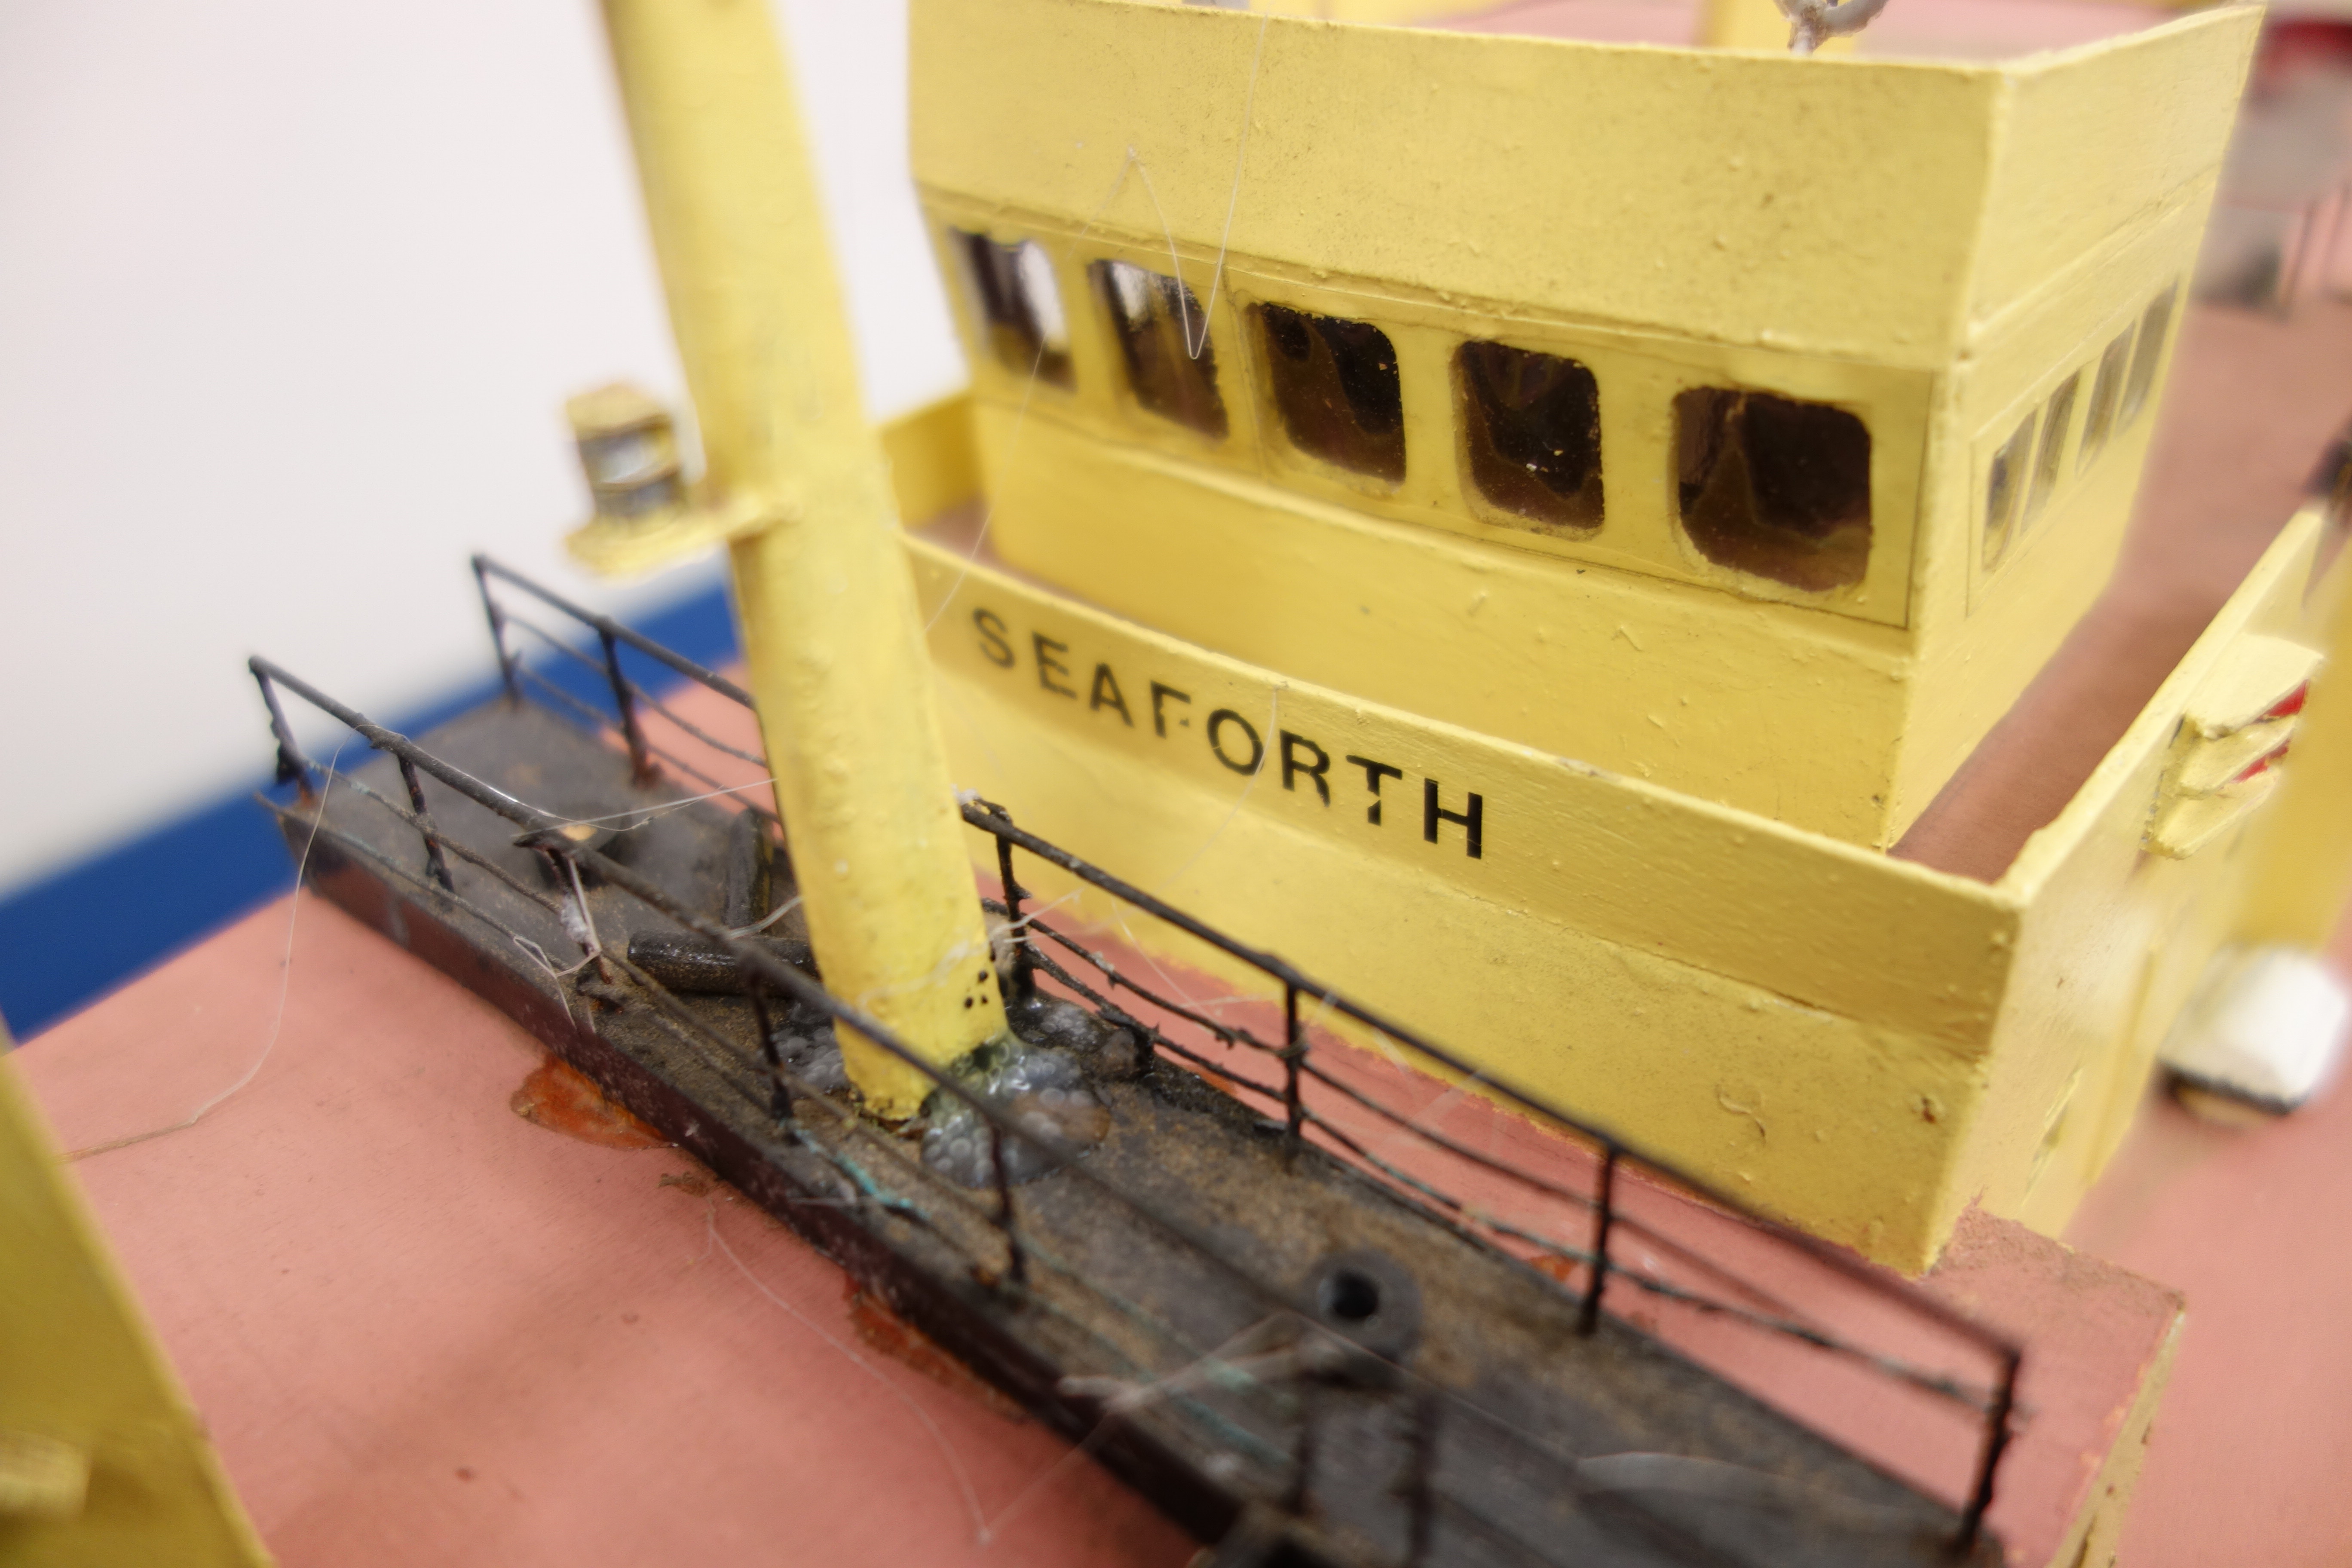 Scale model of the Offshore Supply Ship Seaforth, L90cm, - Image 5 of 5